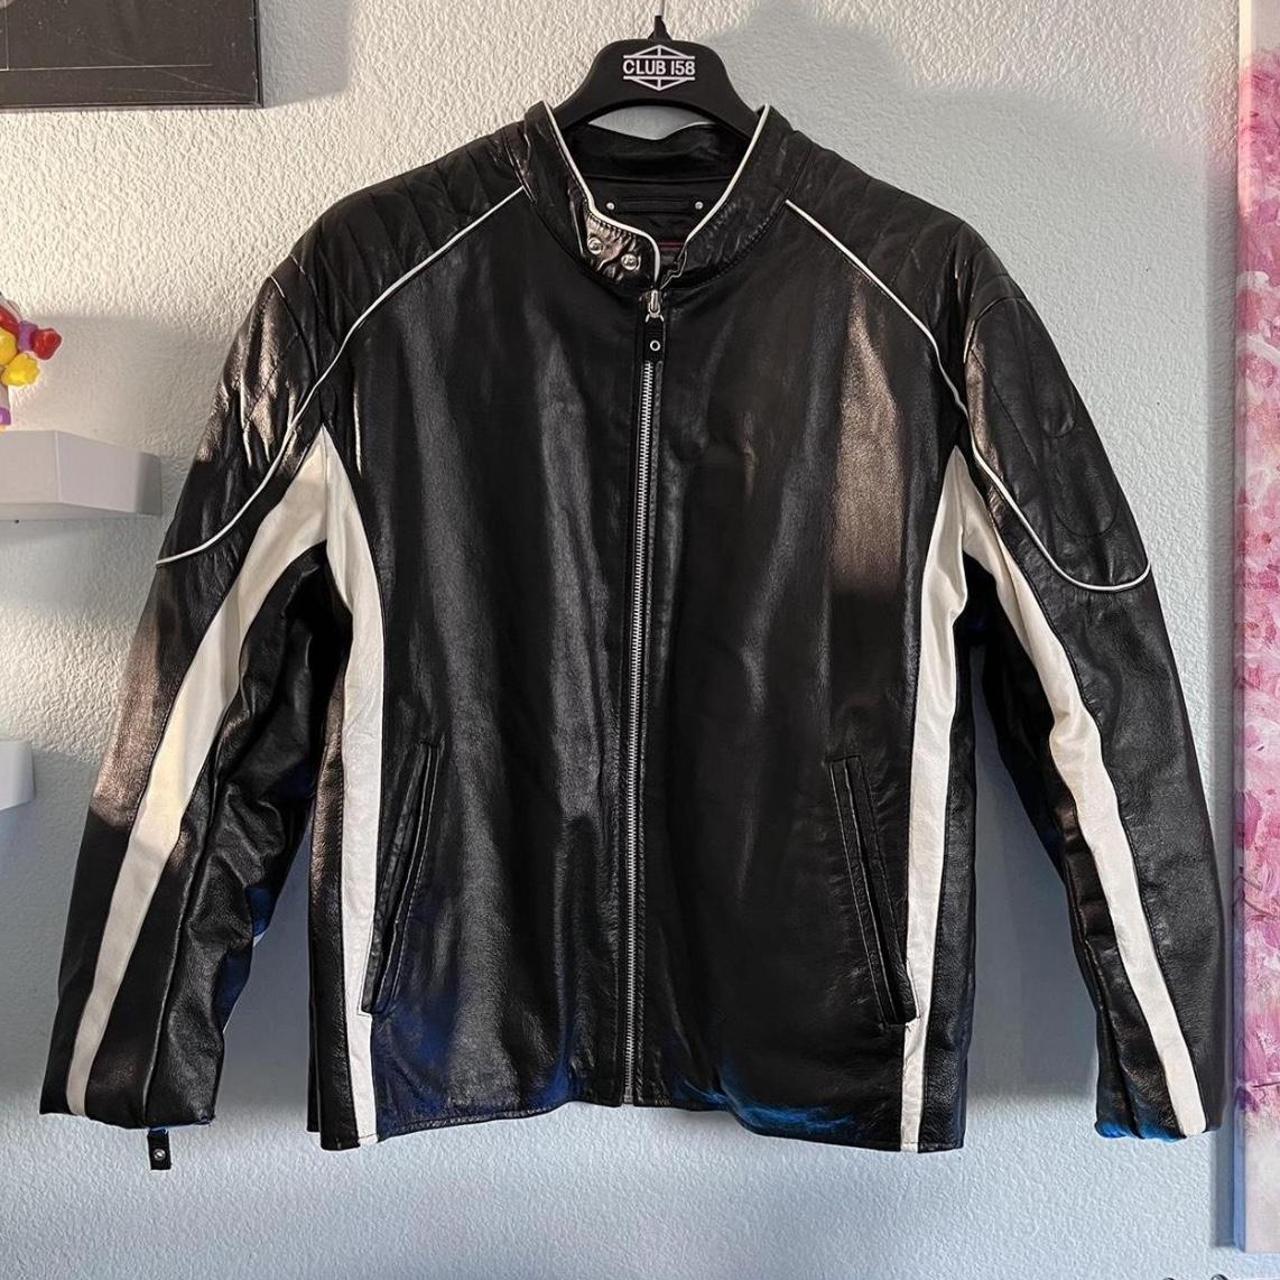 Wilson’s Leather Men's Black and White Jacket